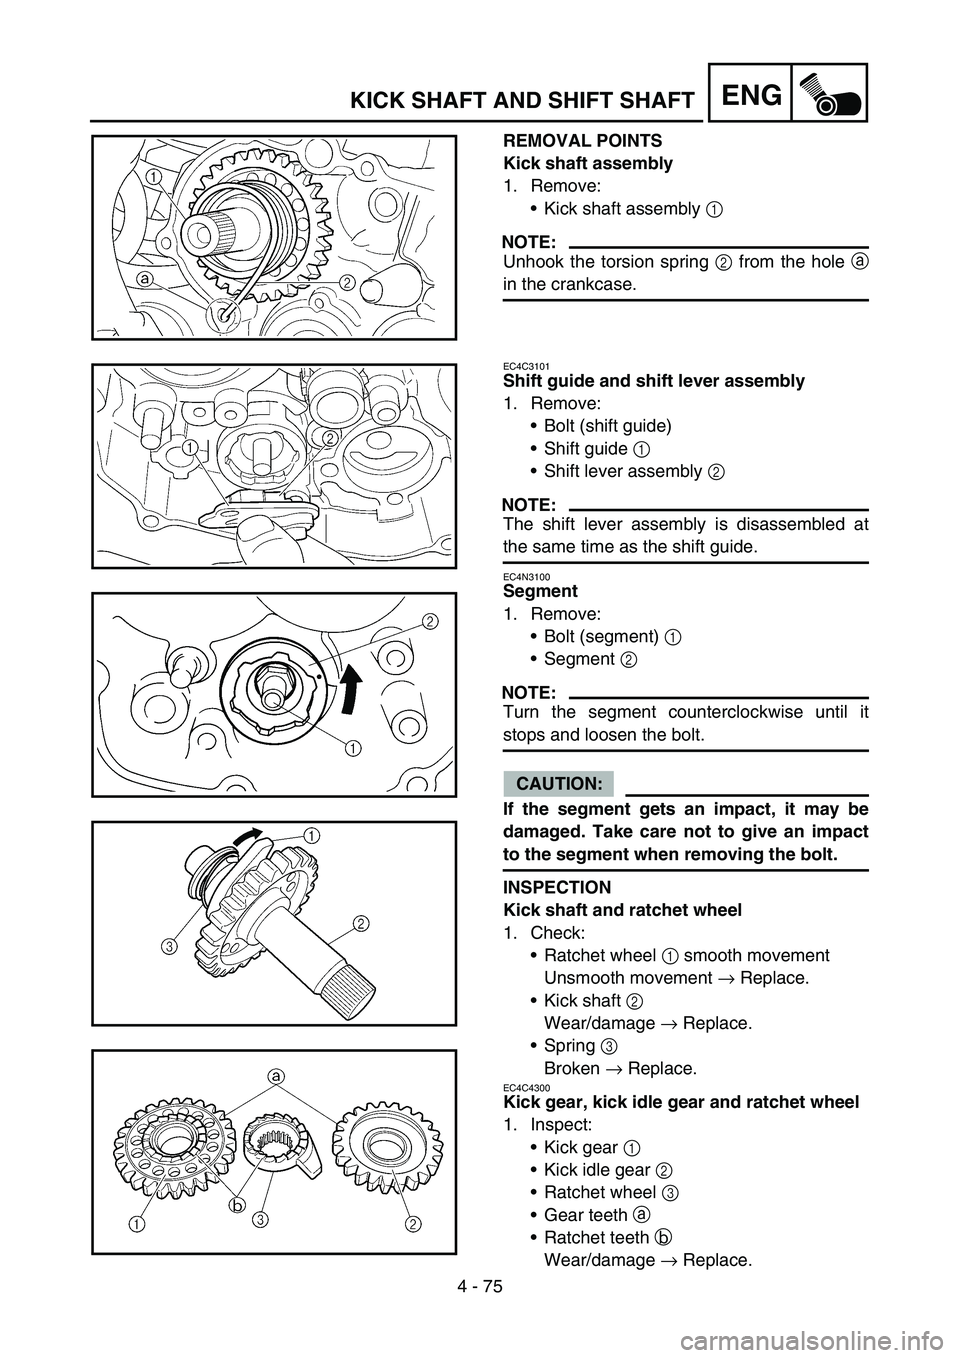 YAMAHA YZ250F 2007  Owners Manual 4 - 75
ENGKICK SHAFT AND SHIFT SHAFT
REMOVAL POINTS
Kick shaft assembly
1. Remove:
Kick shaft assembly 1 
NOTE:
Unhook the torsion spring 2 from the hole a
in the crankcase.
EC4C3101
Shift guide and 